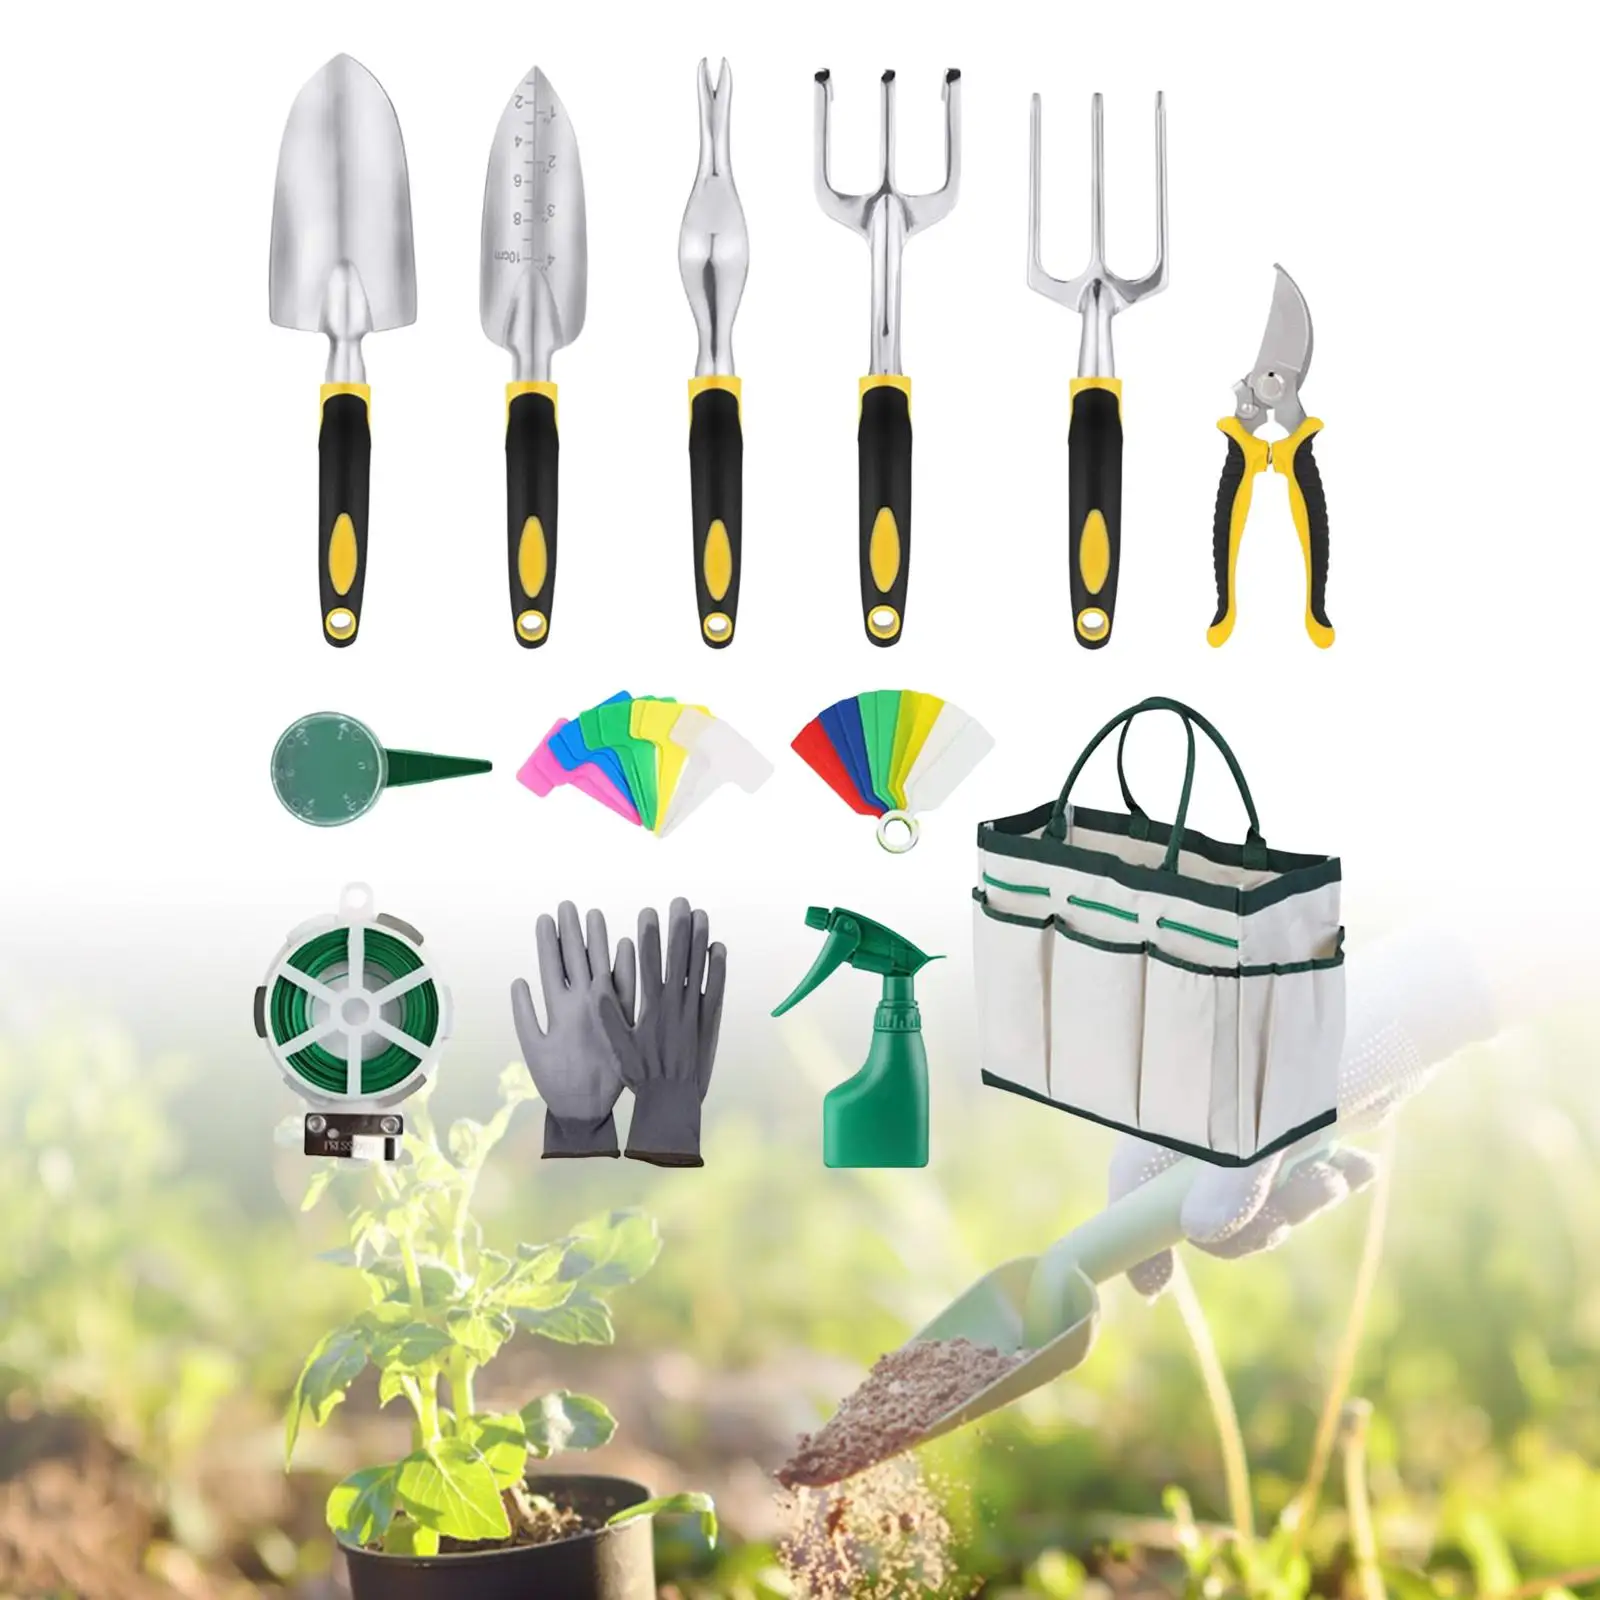 13 Pieces Portable Hand Shovels Balcony Potted Cultivation Hand Tool Hand Tool Garden Shovels for garden Transplanting